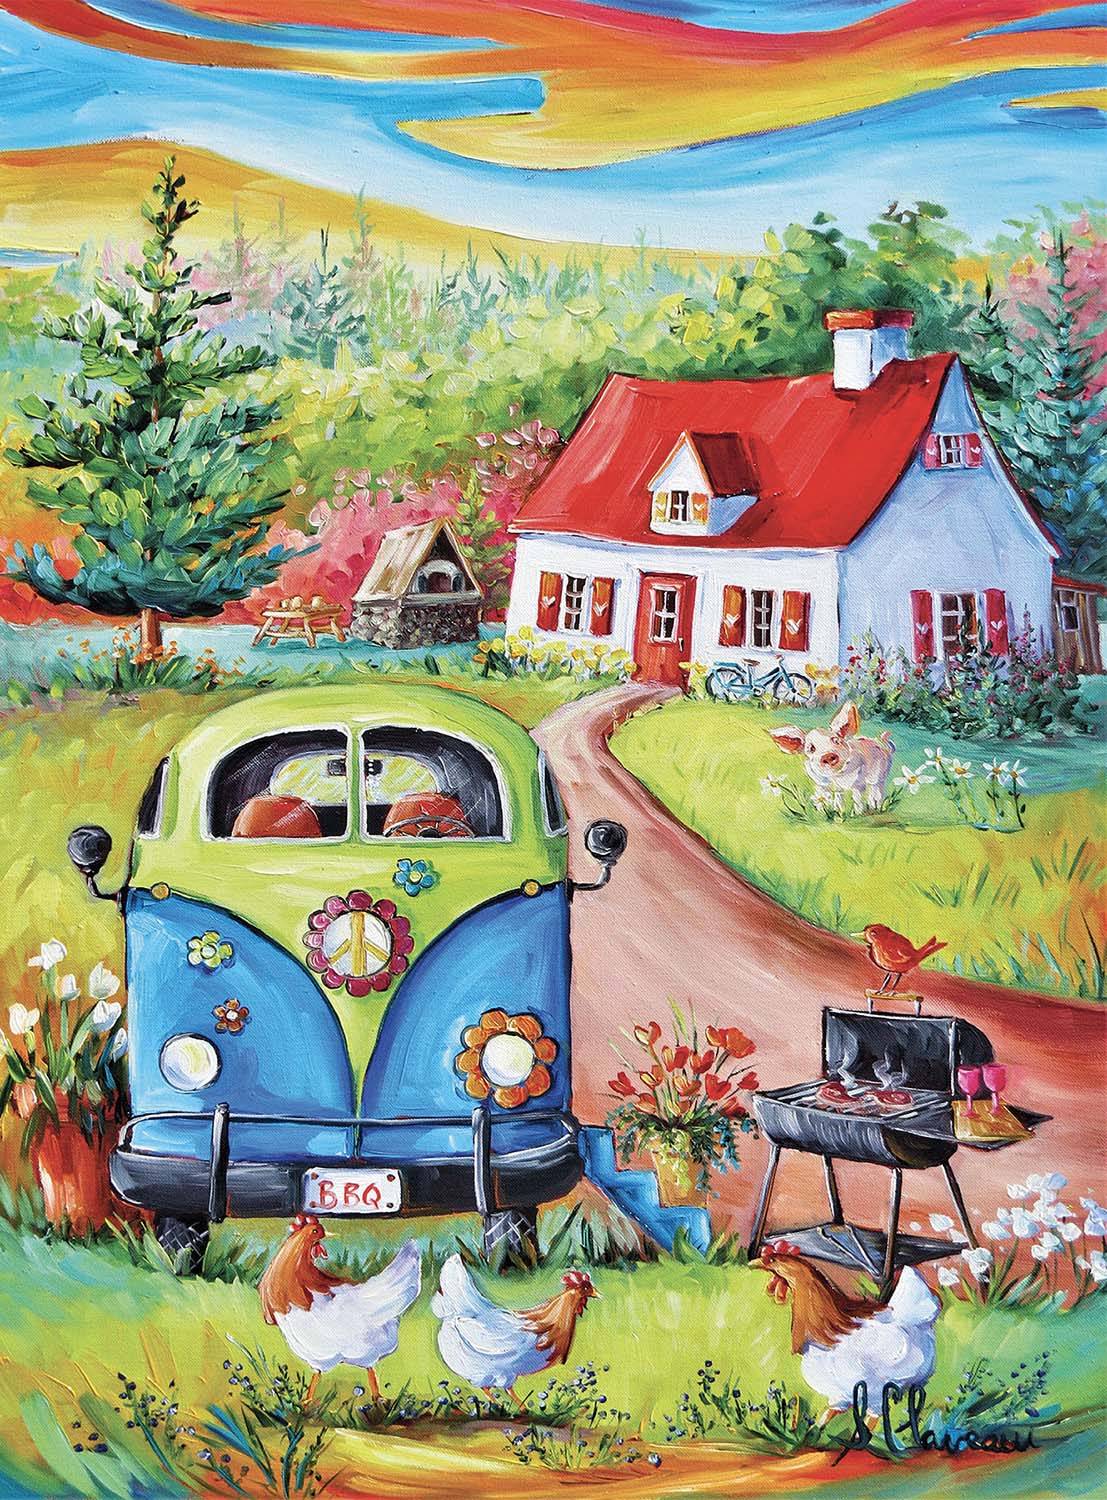 New Arrival At Grandma’s House Cabin & Cottage Jigsaw Puzzle